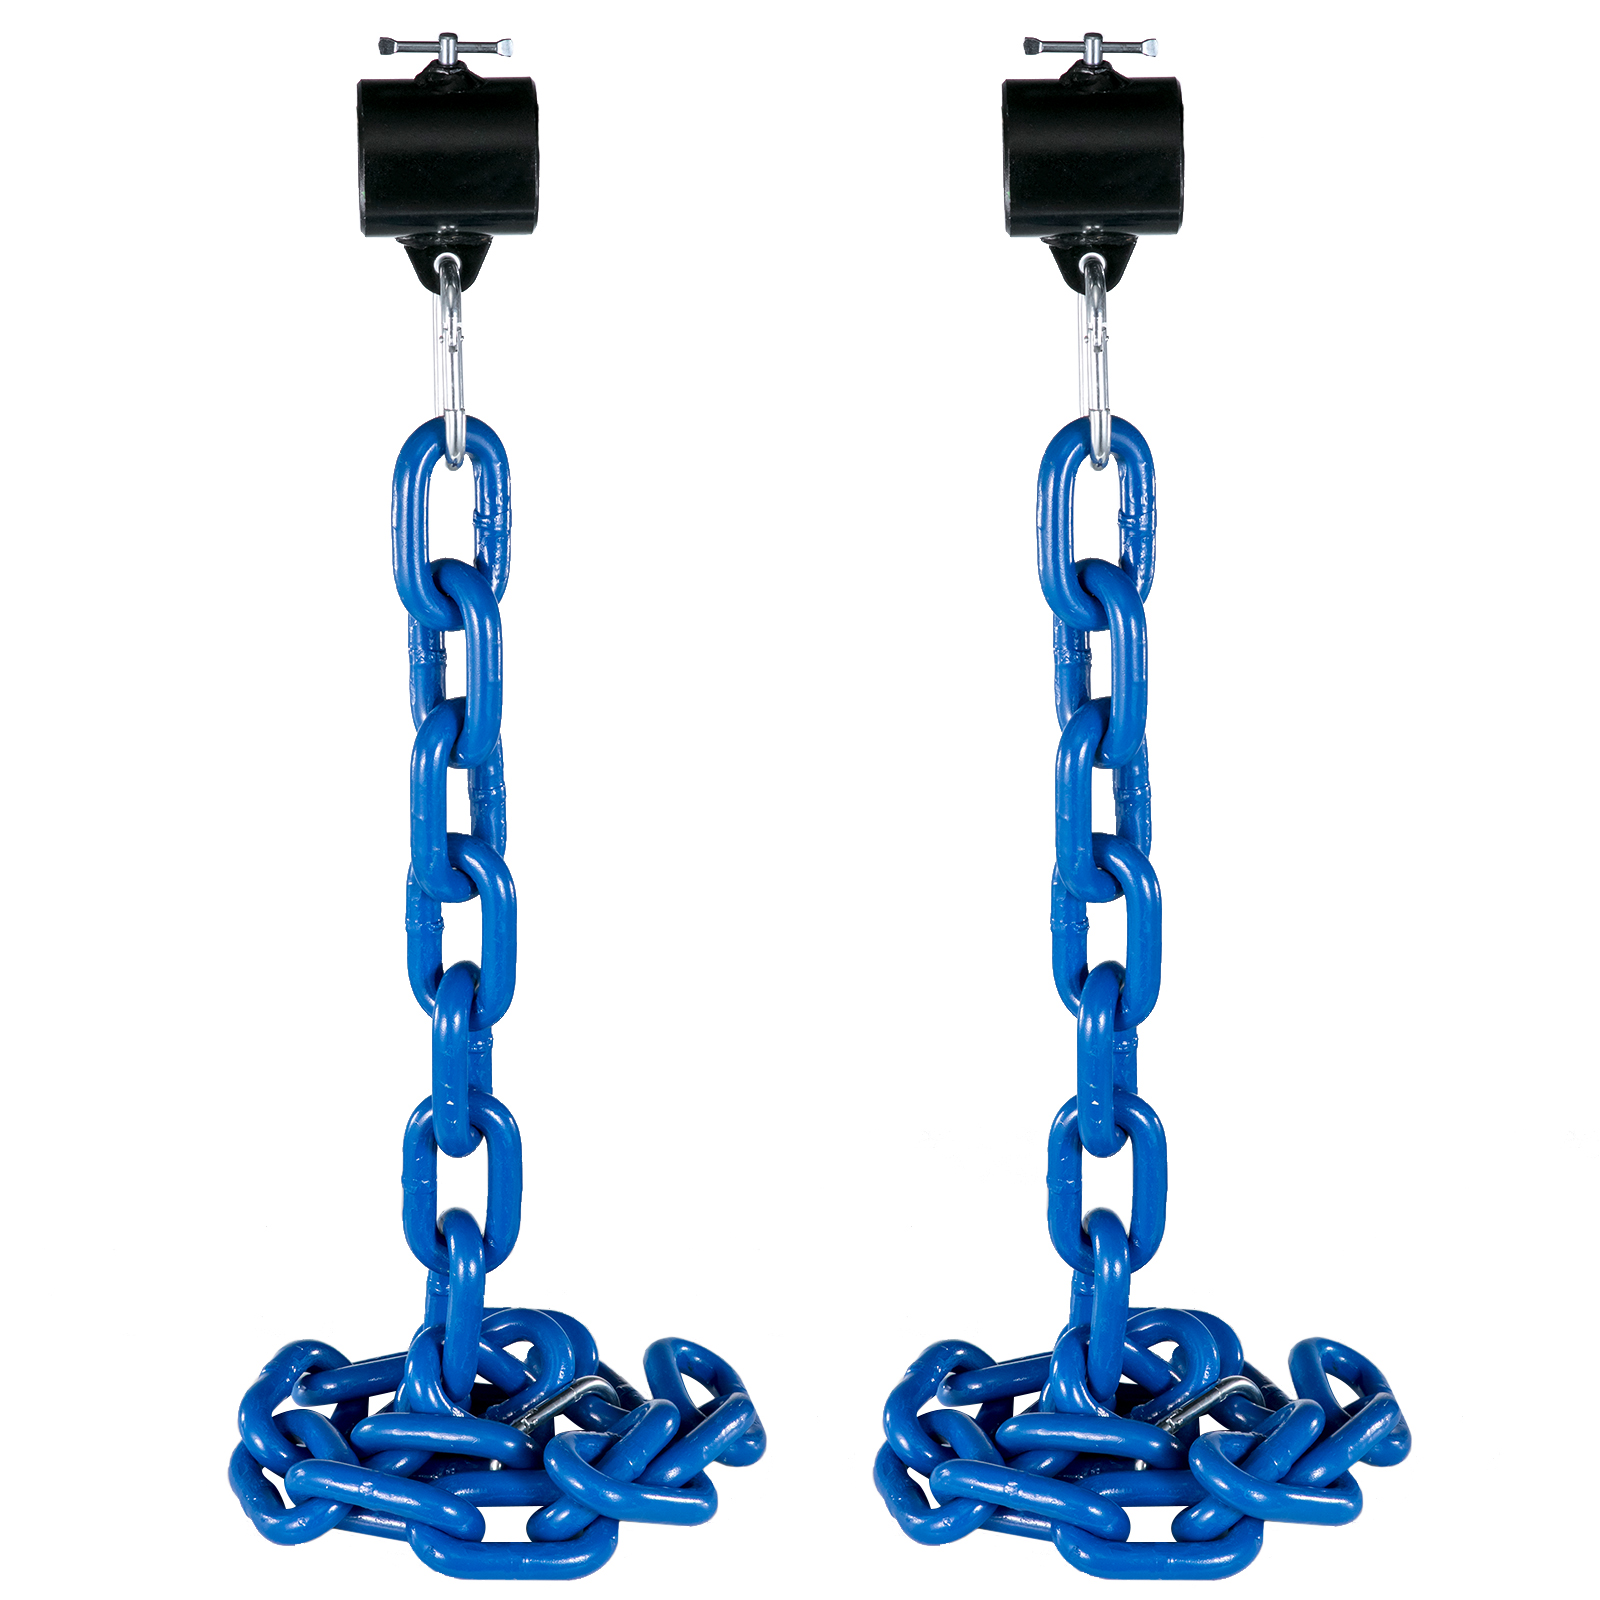 Weight Lifting Chains Olympic Bar Barbell Chain Pairs 26LB/12kg Collars Strength от Vevor Many GEOs